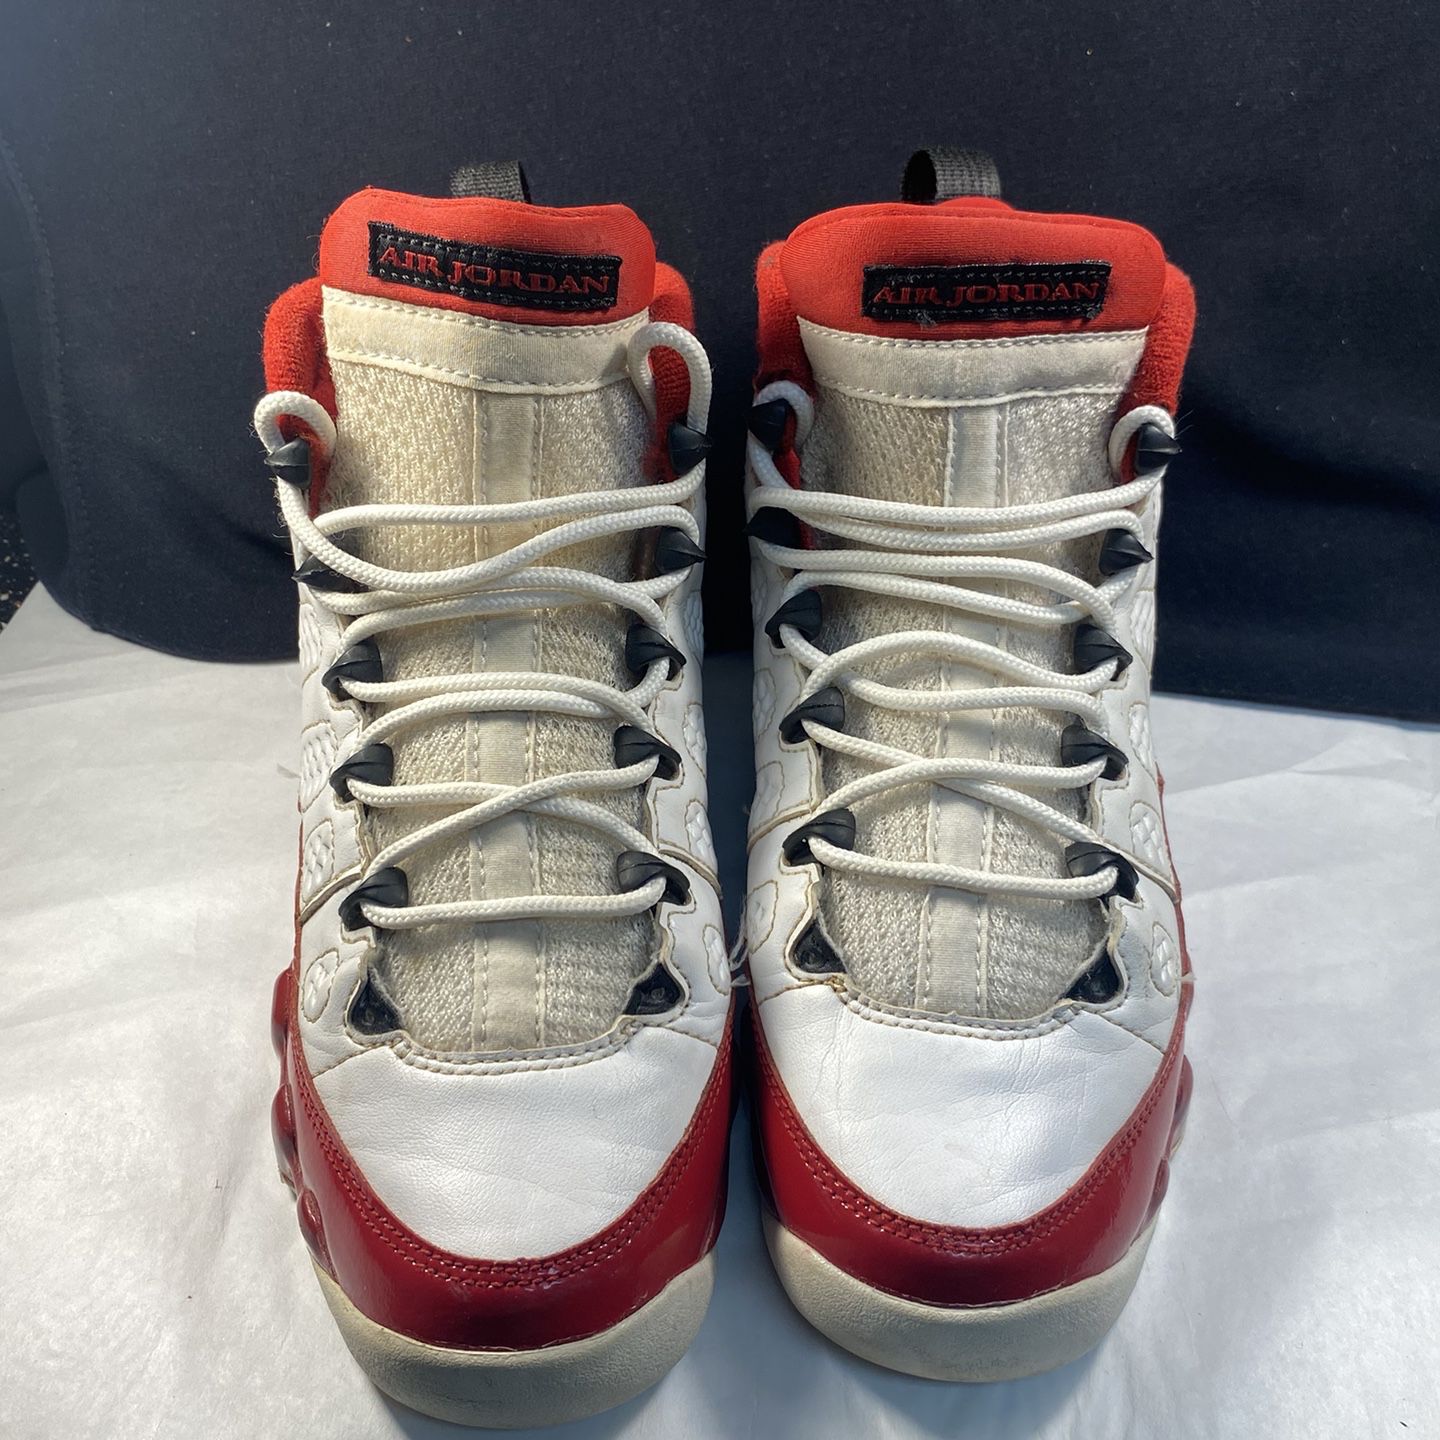 Used Jordan 9s Gym Red Size 5